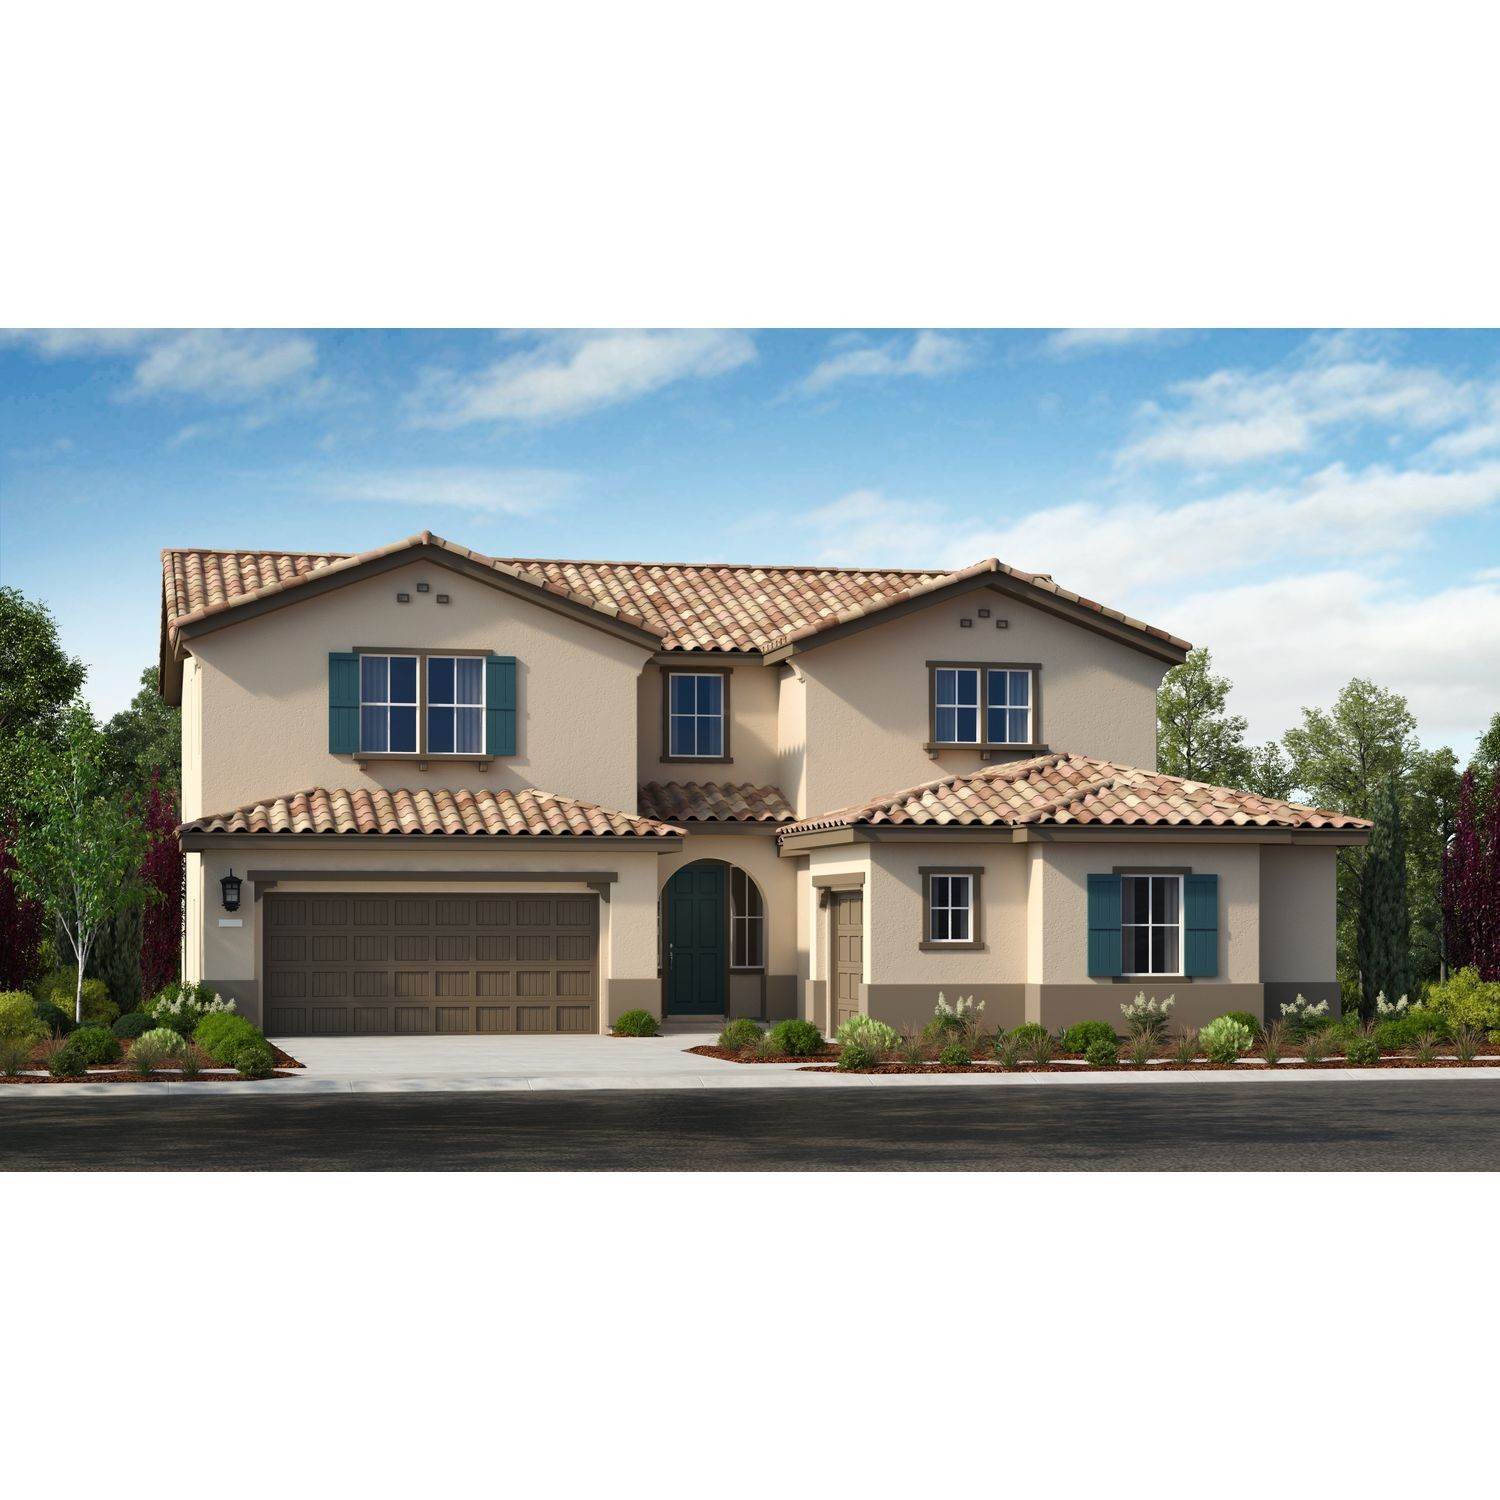 Single Family for Sale at Magnolia At Fiddyment Farm 3009 Mosaic Way, Roseville, CA 95747